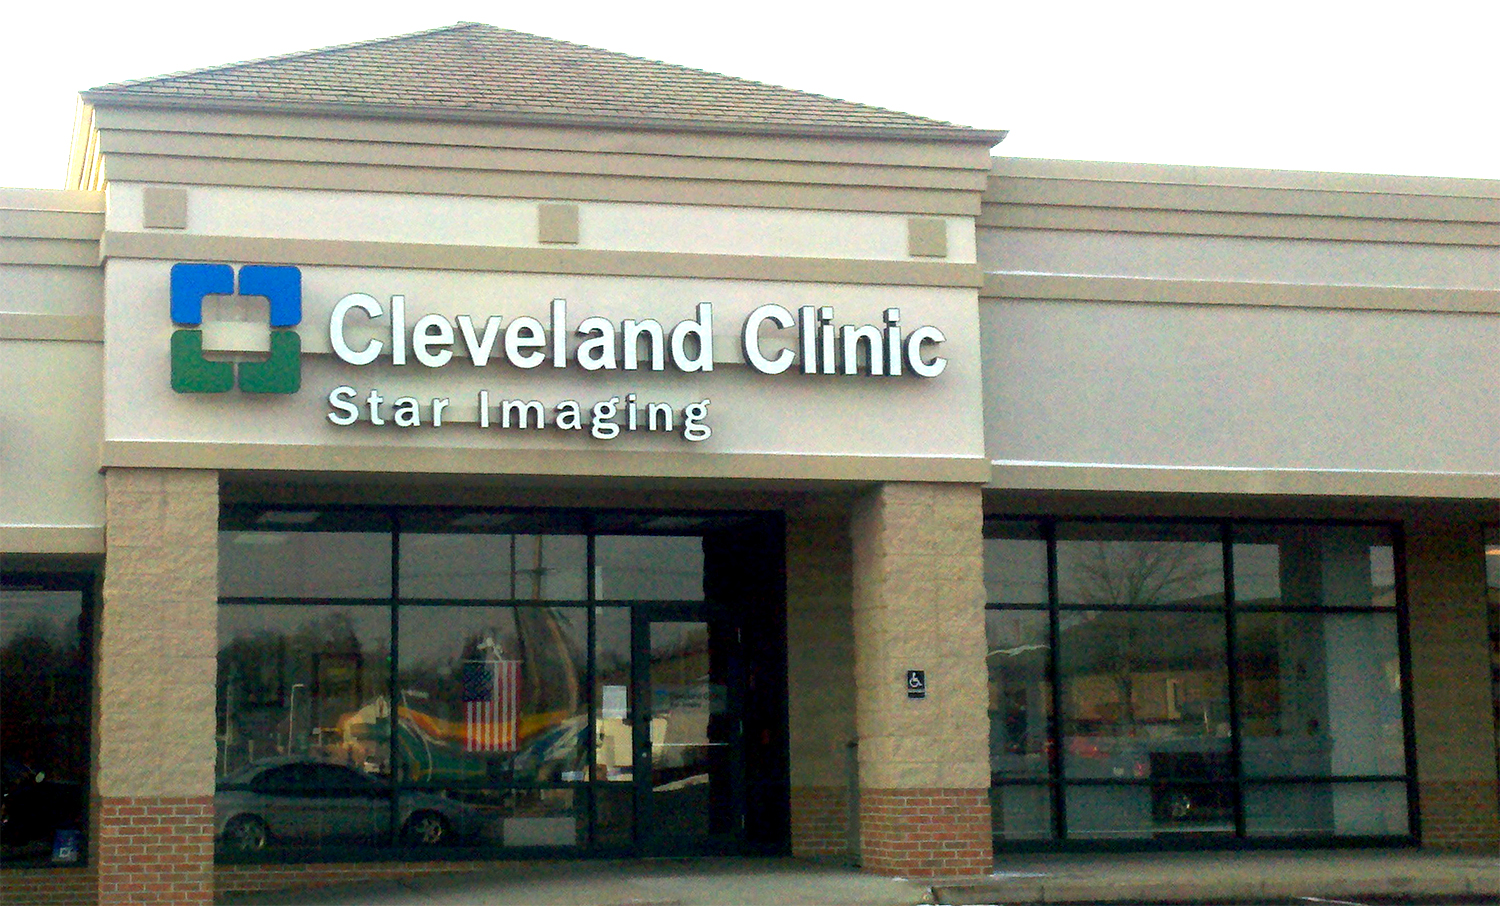 Canfield Area STAR Imaging | Cleveland Clinic